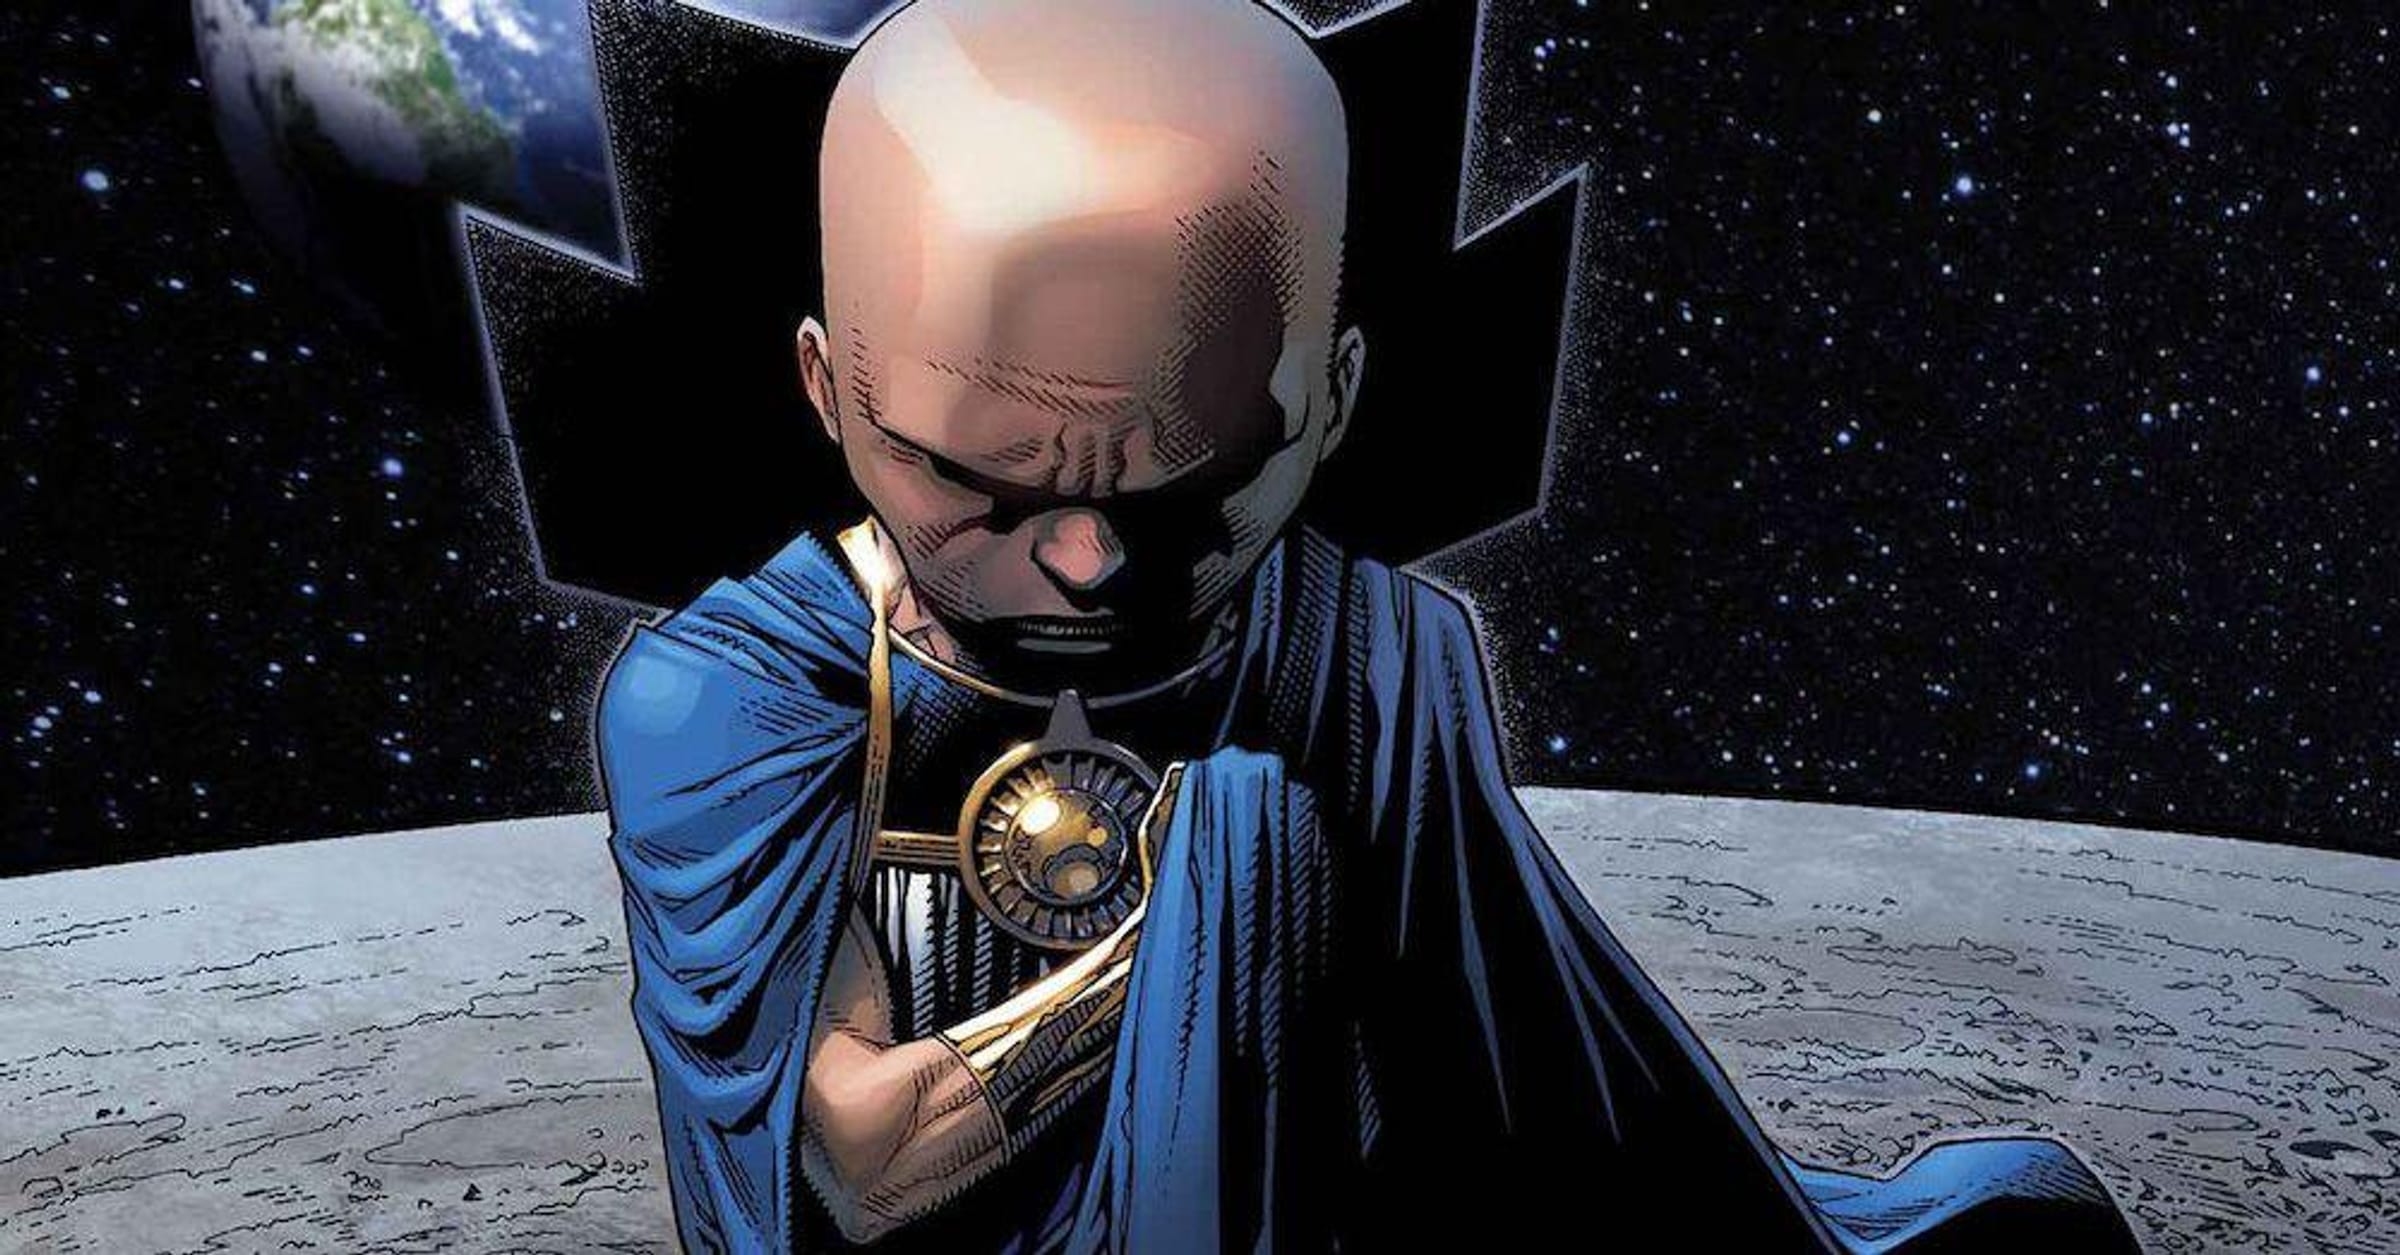 Is The Watcher The Ultimate Bad Guy Of The Marvel Universe? (Spoilers)